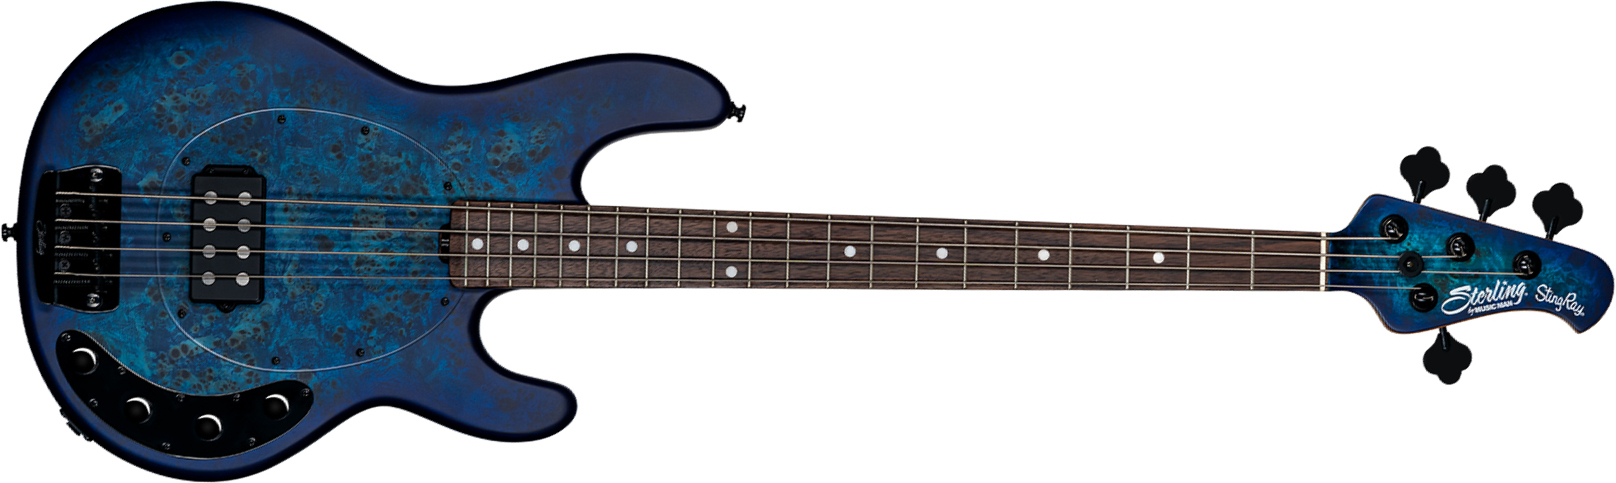 Sterling By Musicman Stingray Ray34pb Active Rw - Neptune Blue Satin - Basse Électrique Solid Body - Main picture